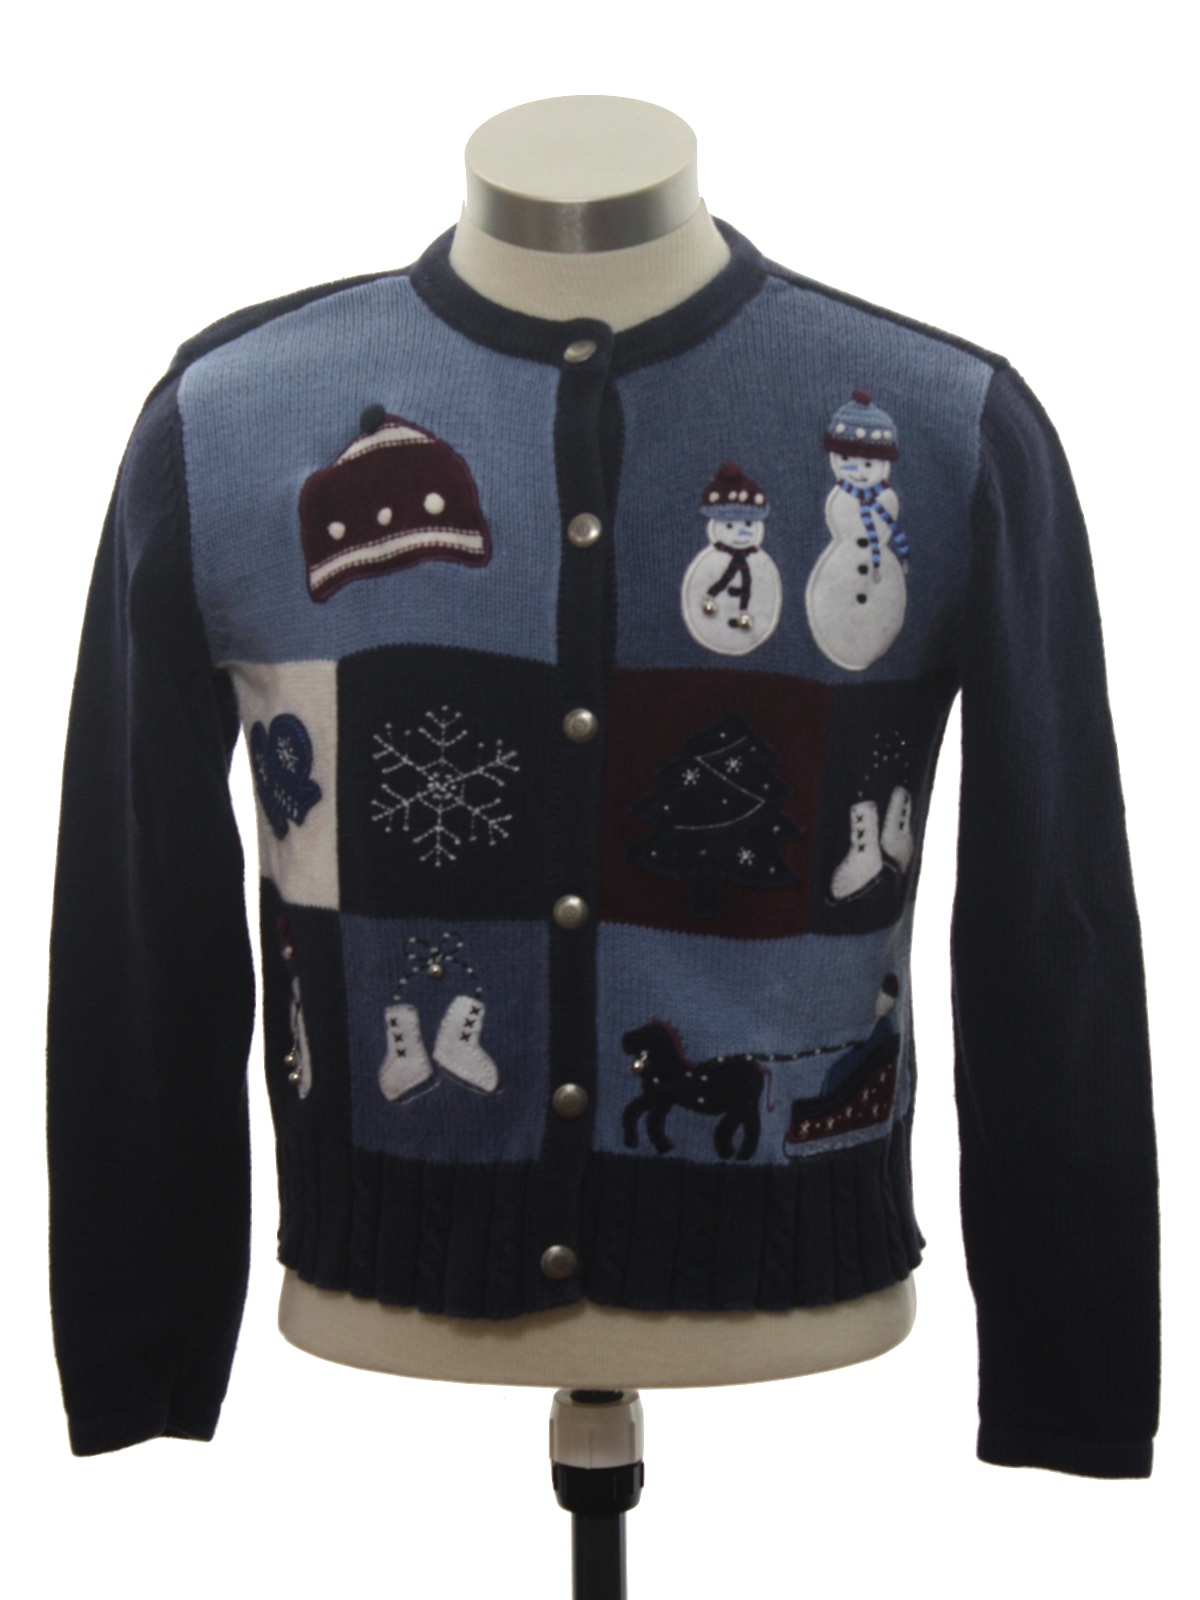 Womens/Girls Ugly Christmas Sweater: -Holiday Lodge- Girls navy blue ...